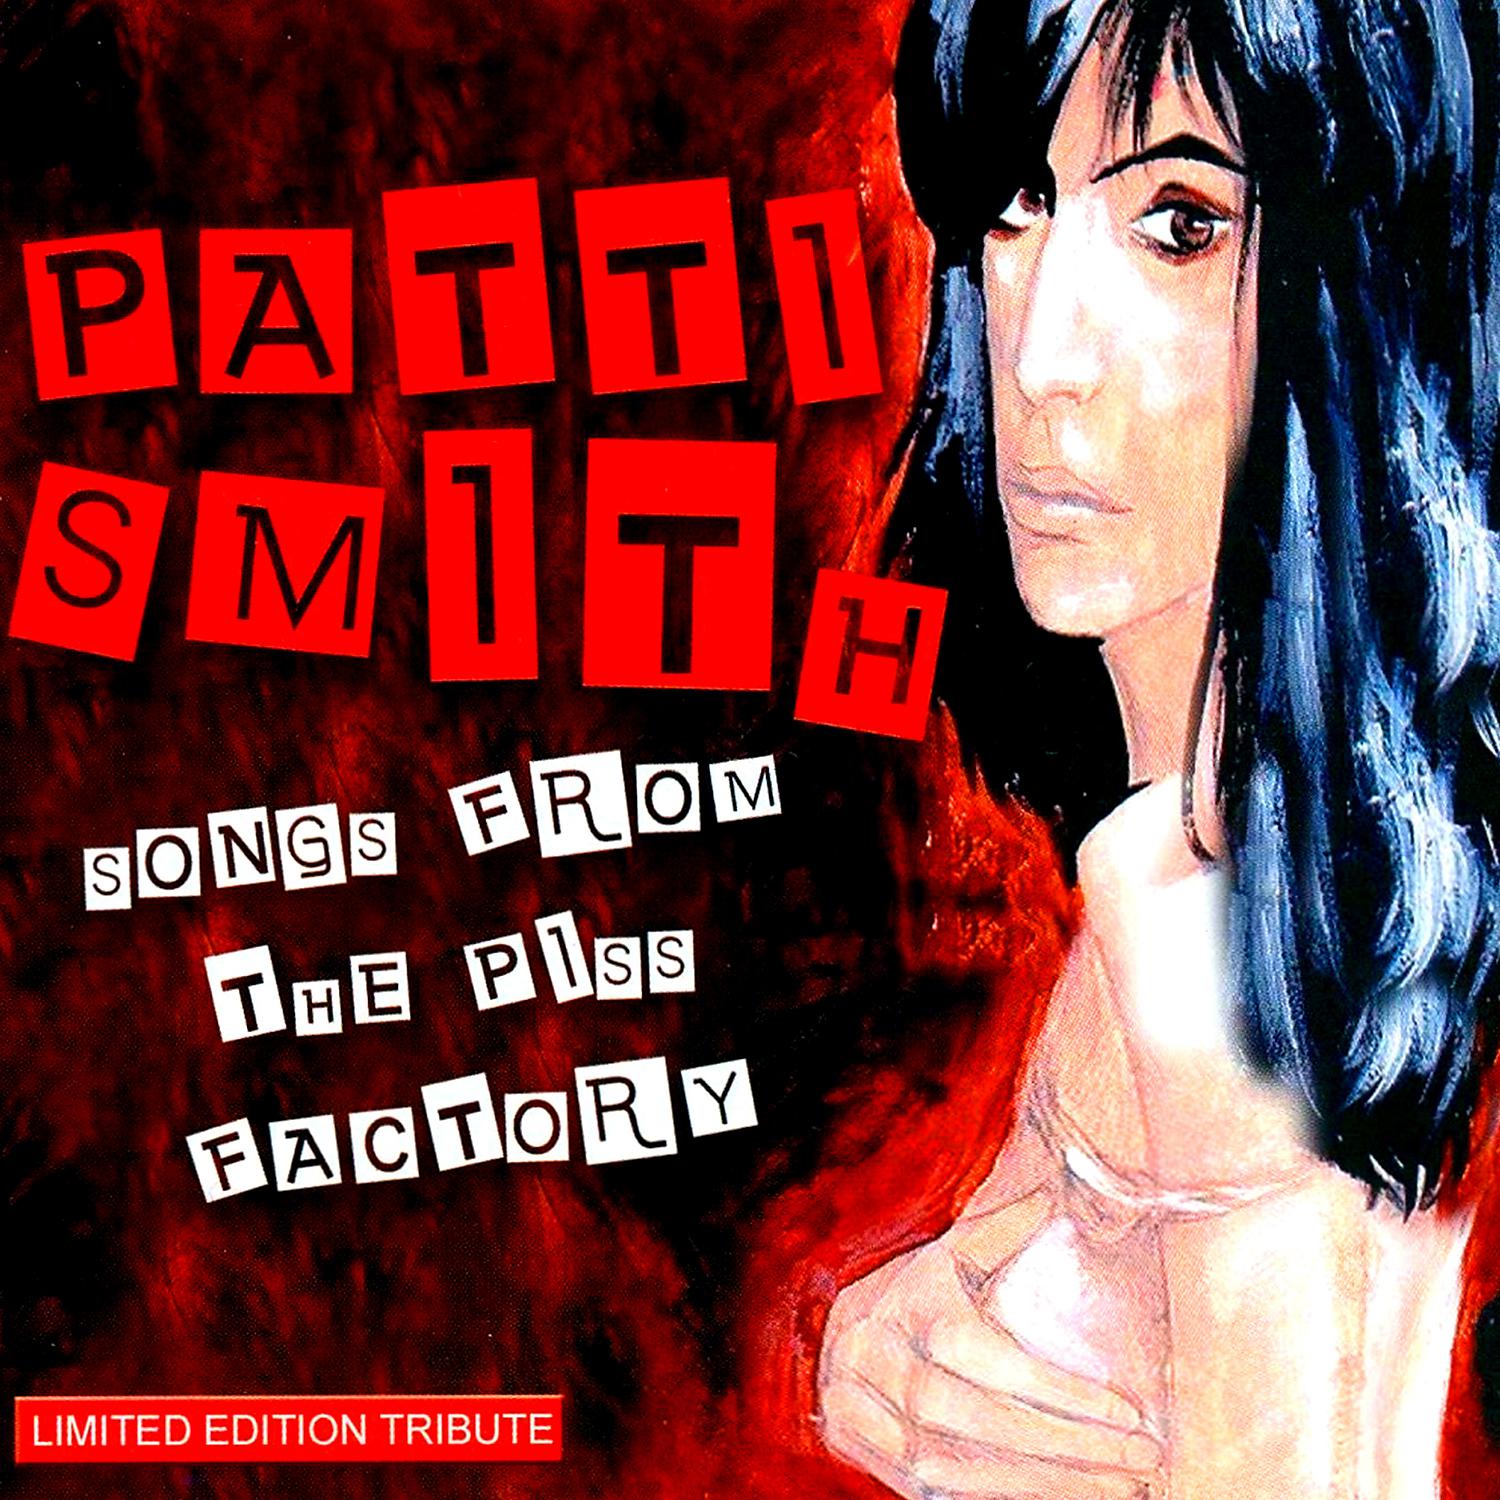 Постер альбома Patti Smith Songs From The Piss Factory